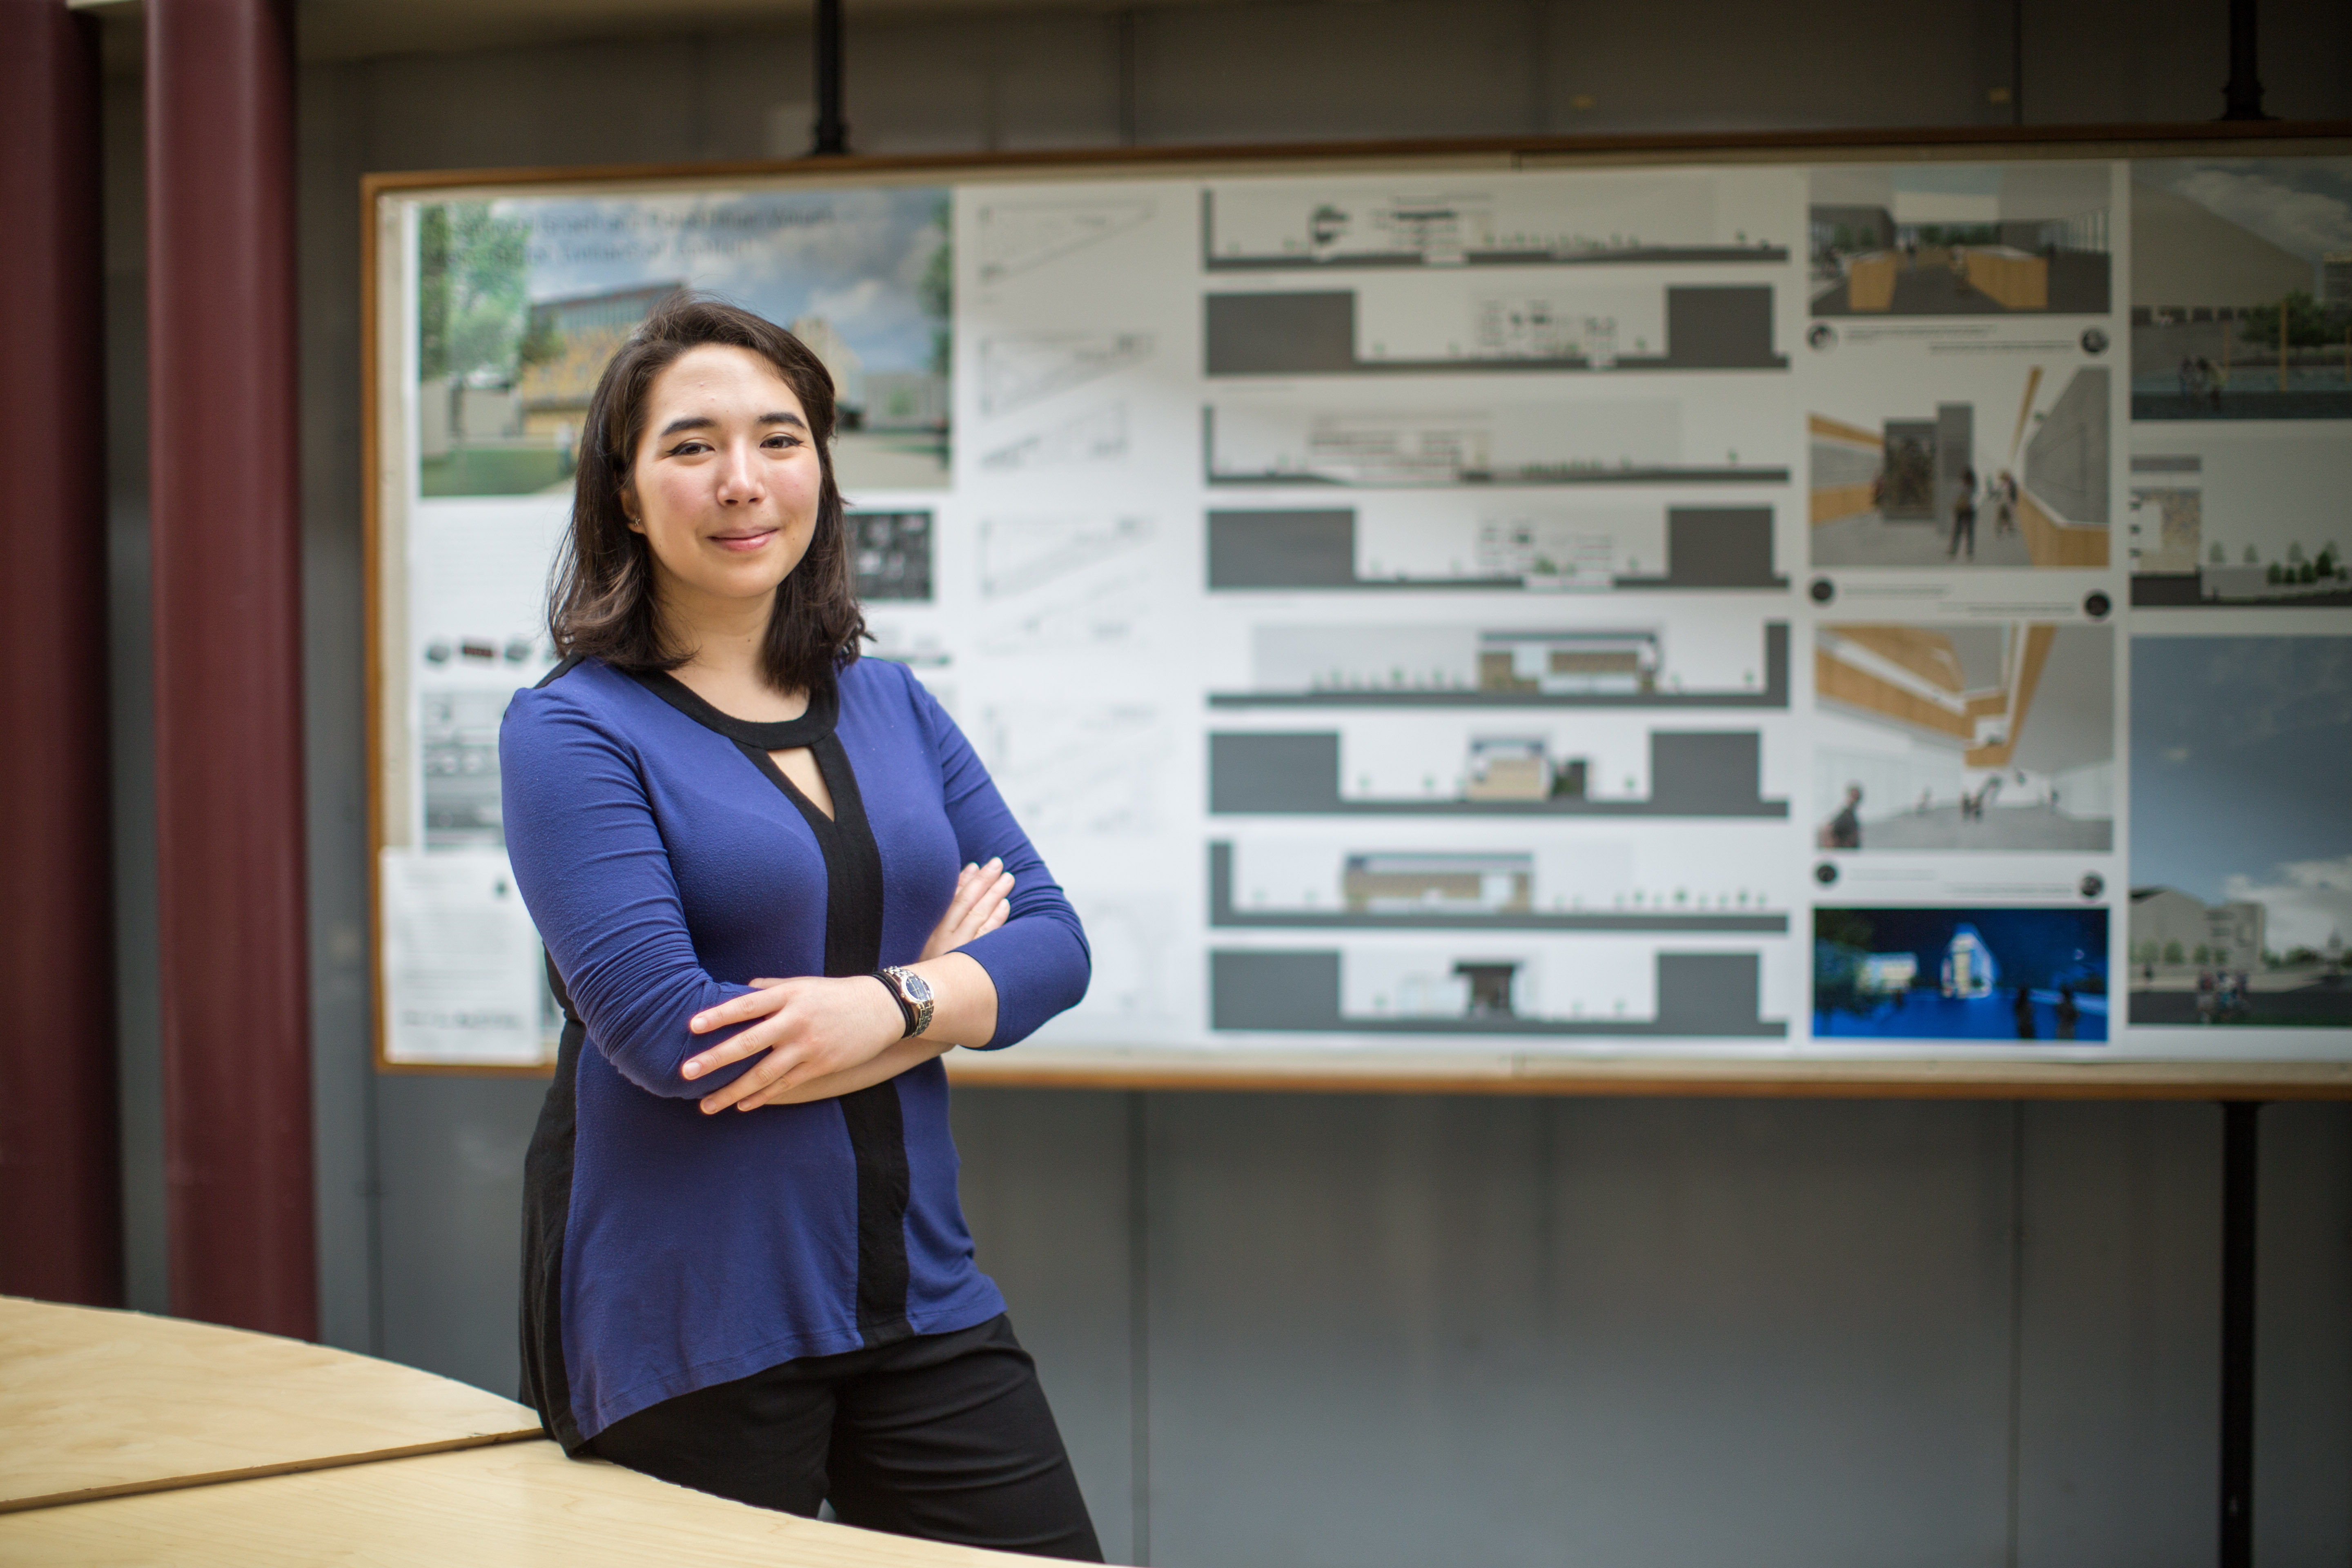 Roger Williams University: Earn your master's in architecture between Boston and New York City